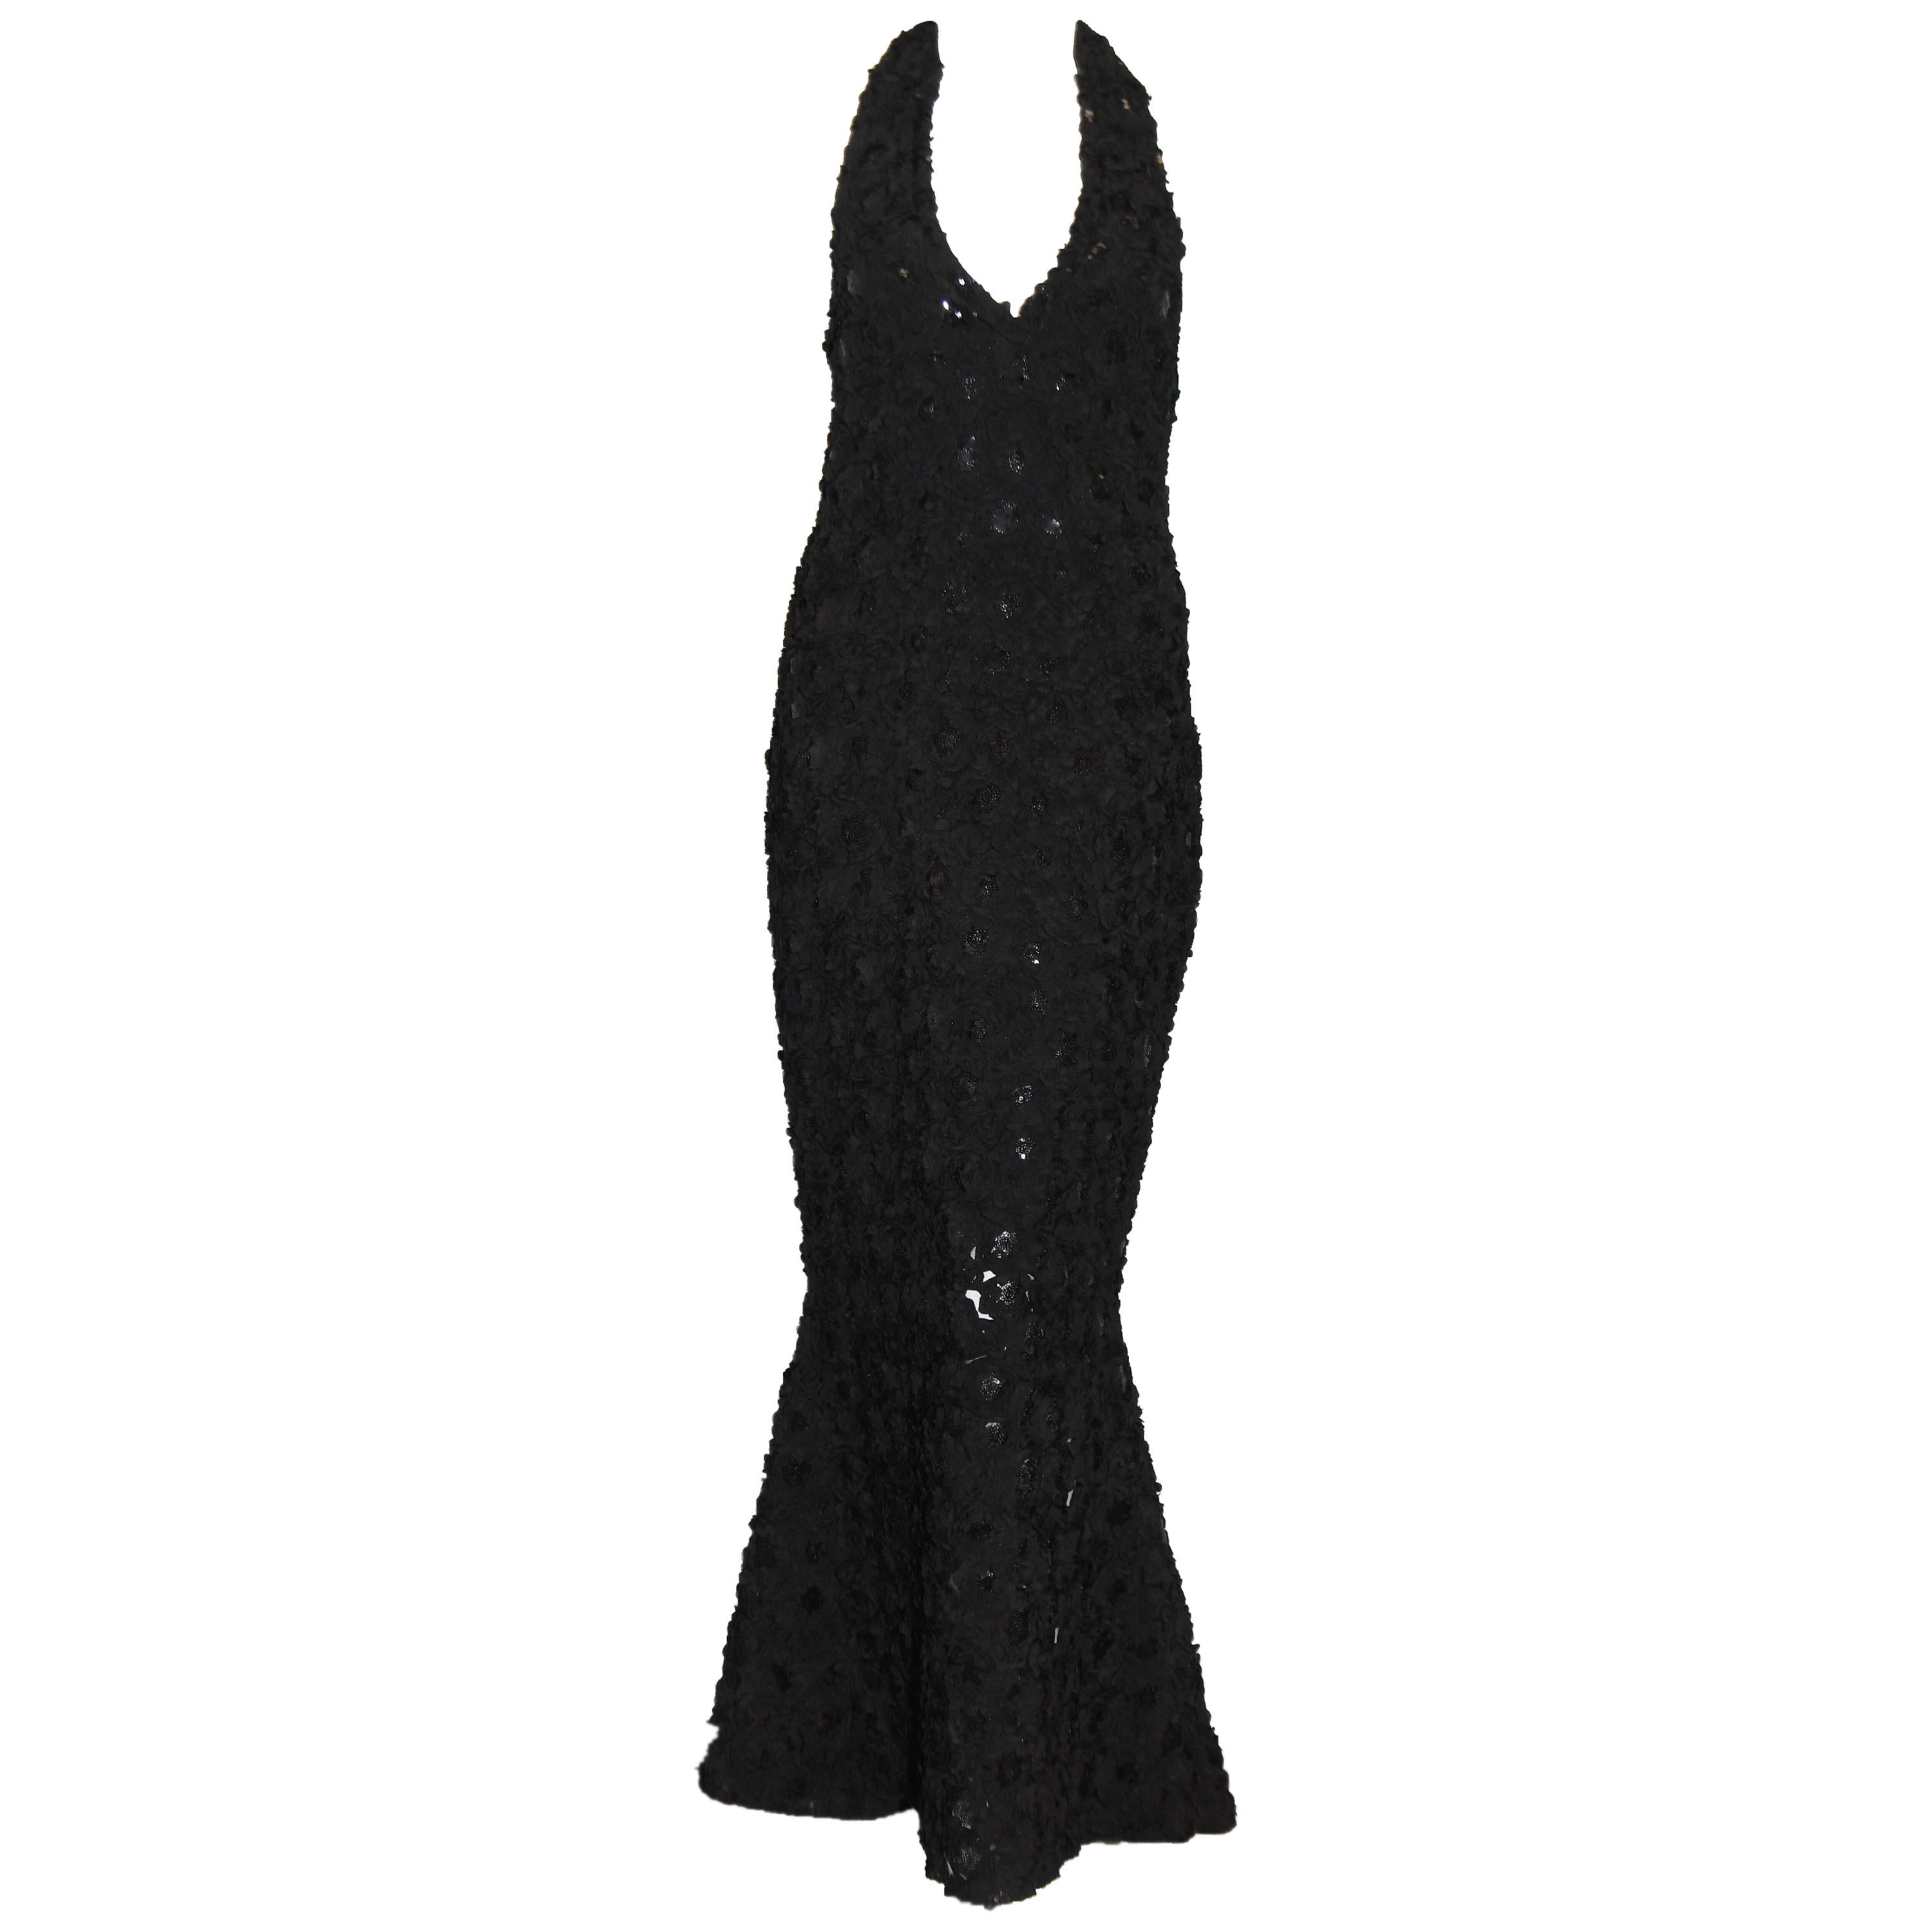 Charismatic Carrie-Me Couture Black Halter Mermaid Style Evening Dress For Sale